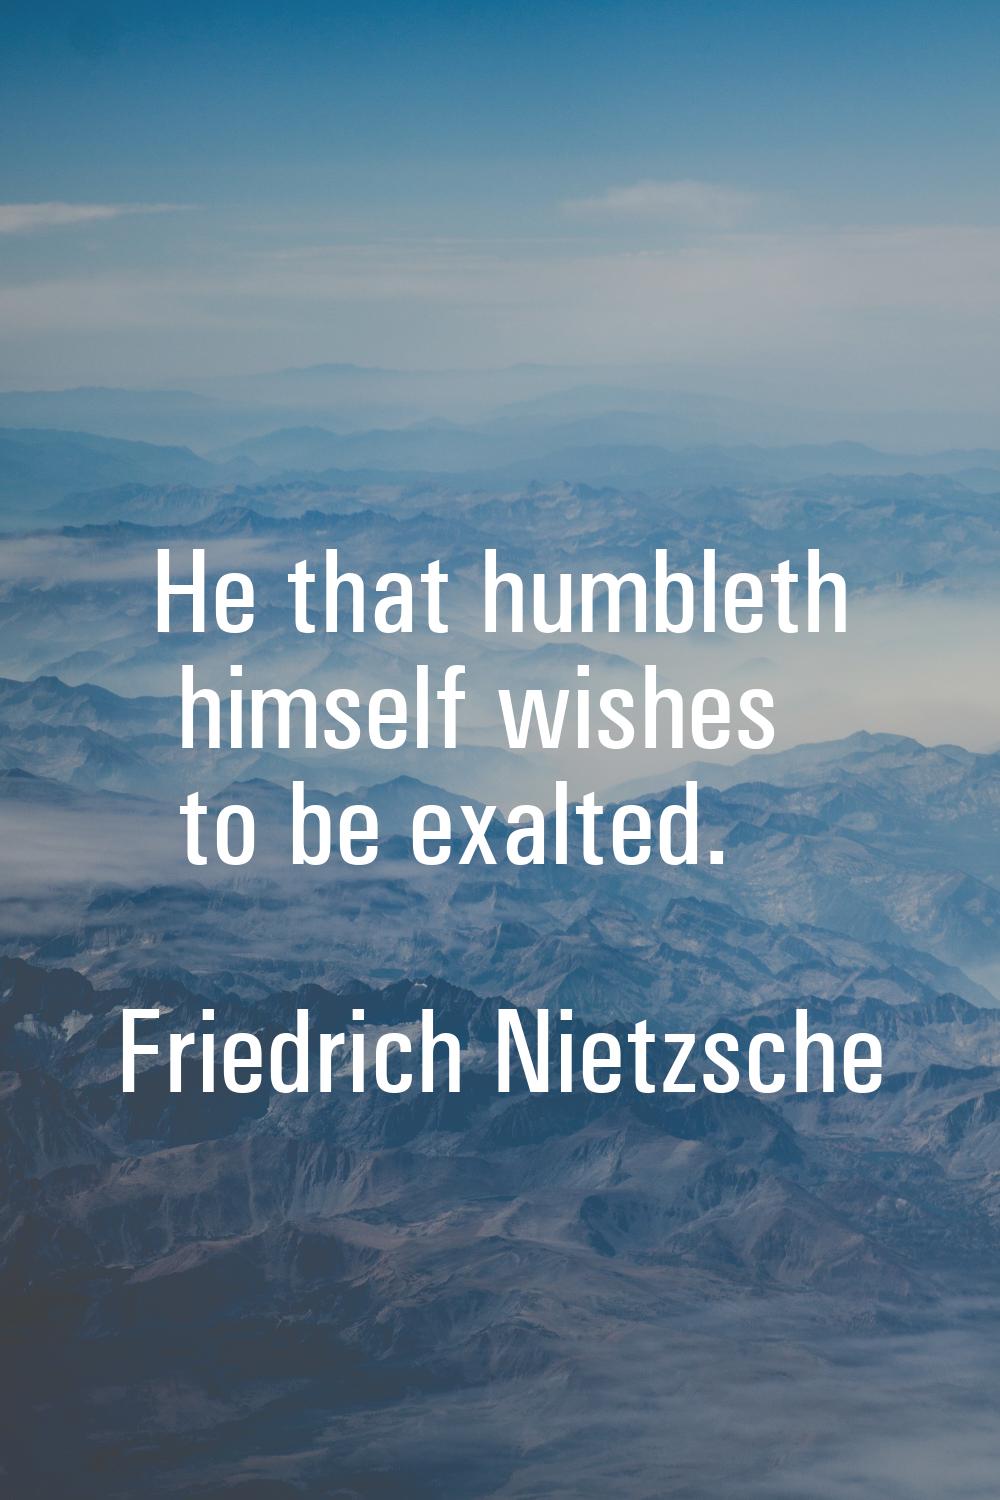 He that humbleth himself wishes to be exalted.